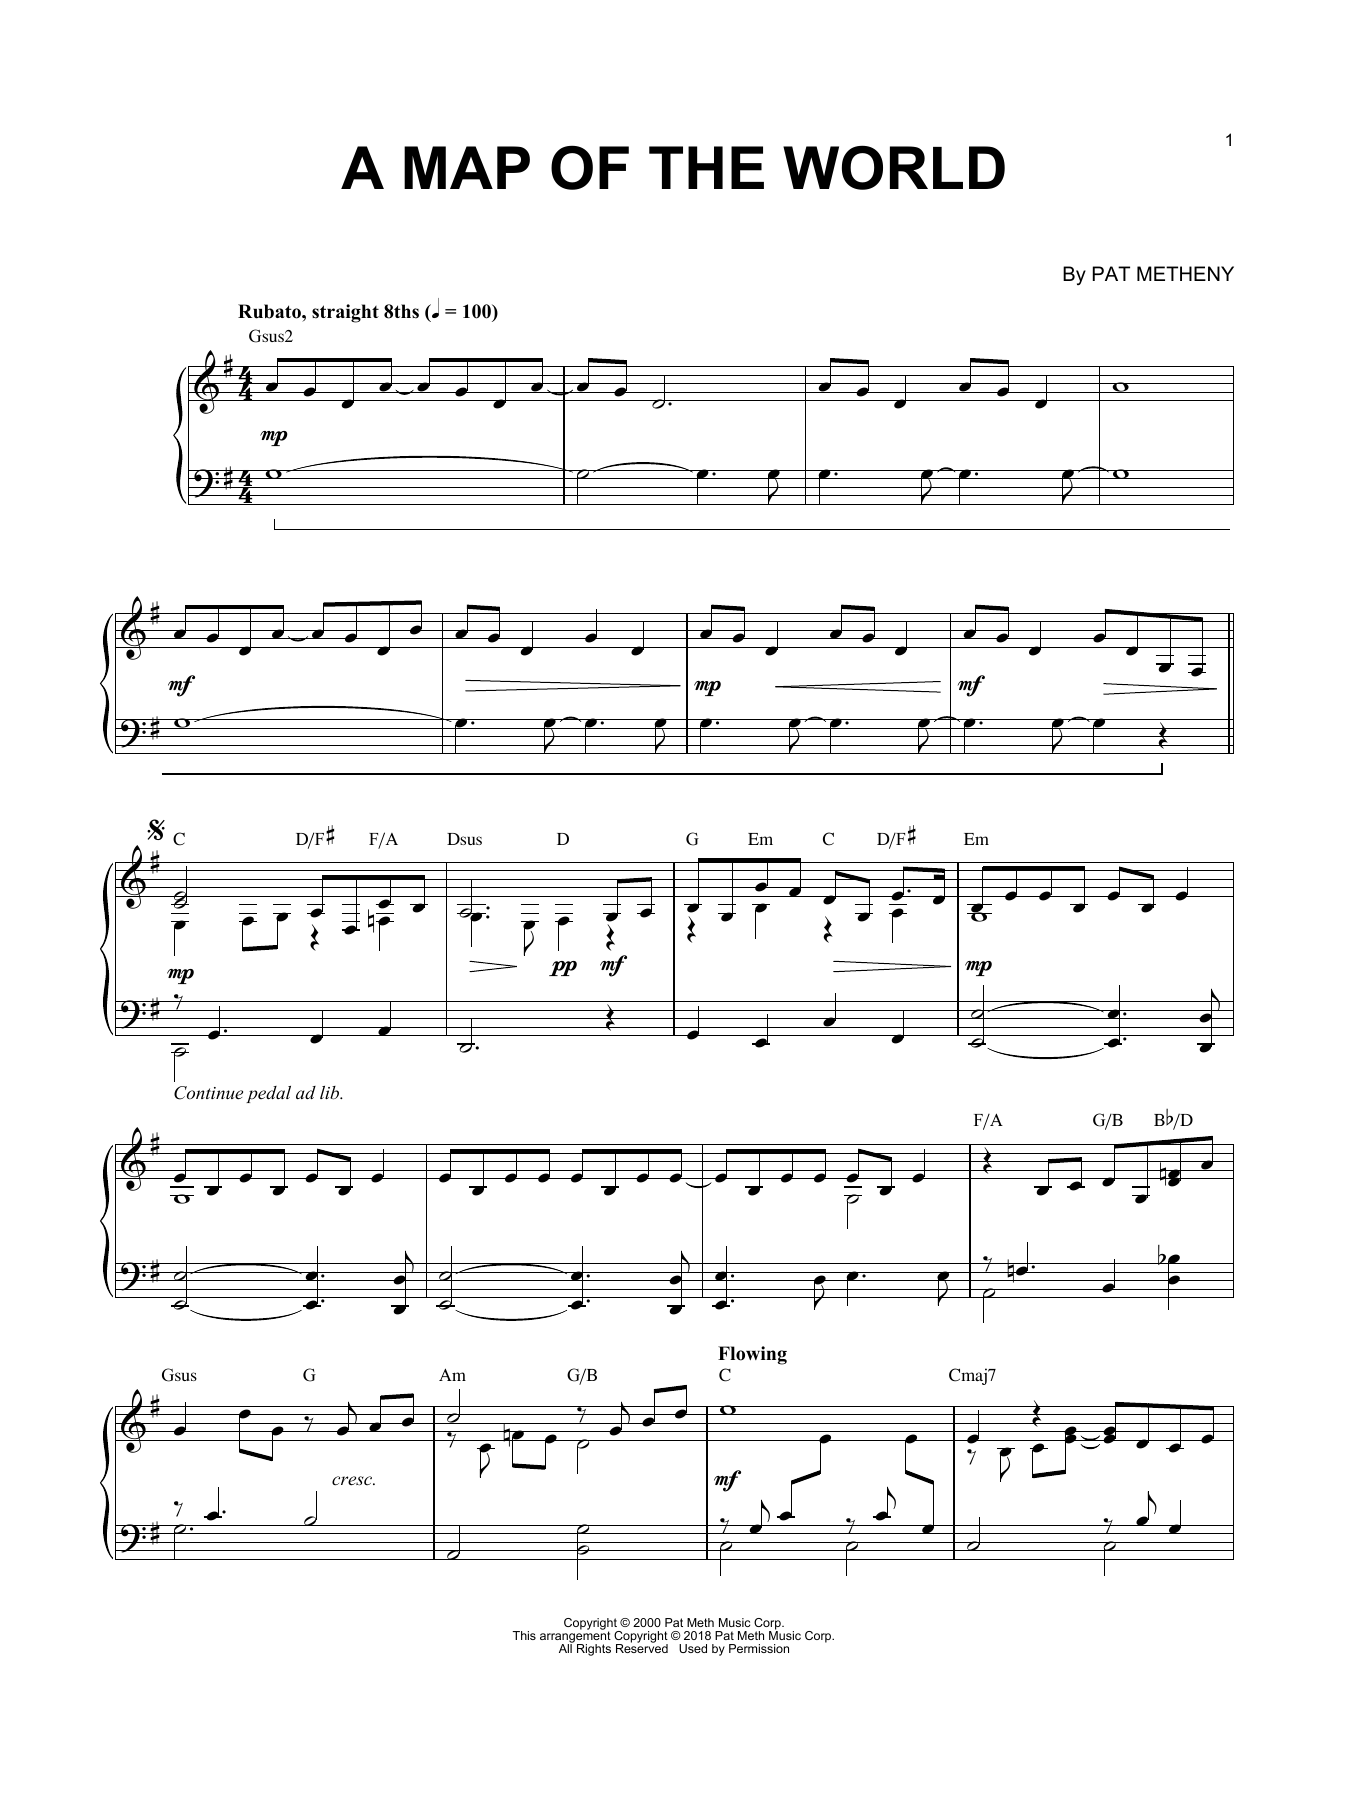 Download Pat Metheny A Map Of The World Sheet Music